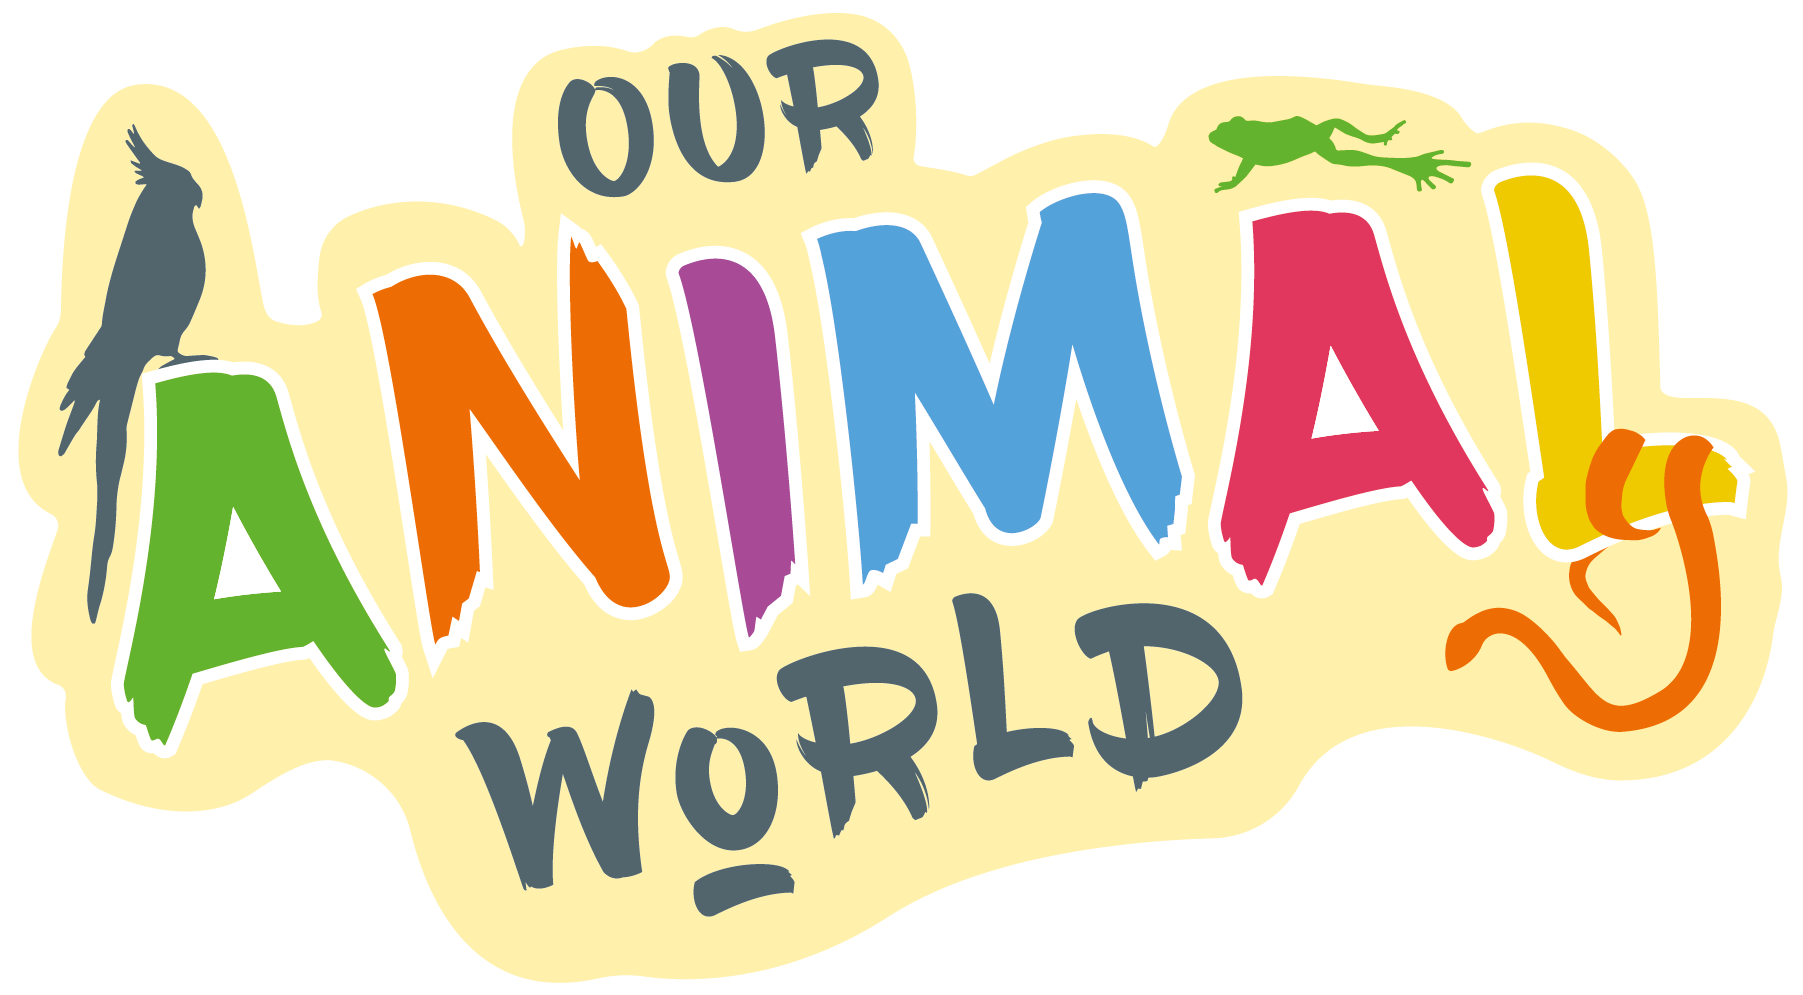 Mobile Petting Zoo | Animal Party | Our Animal World